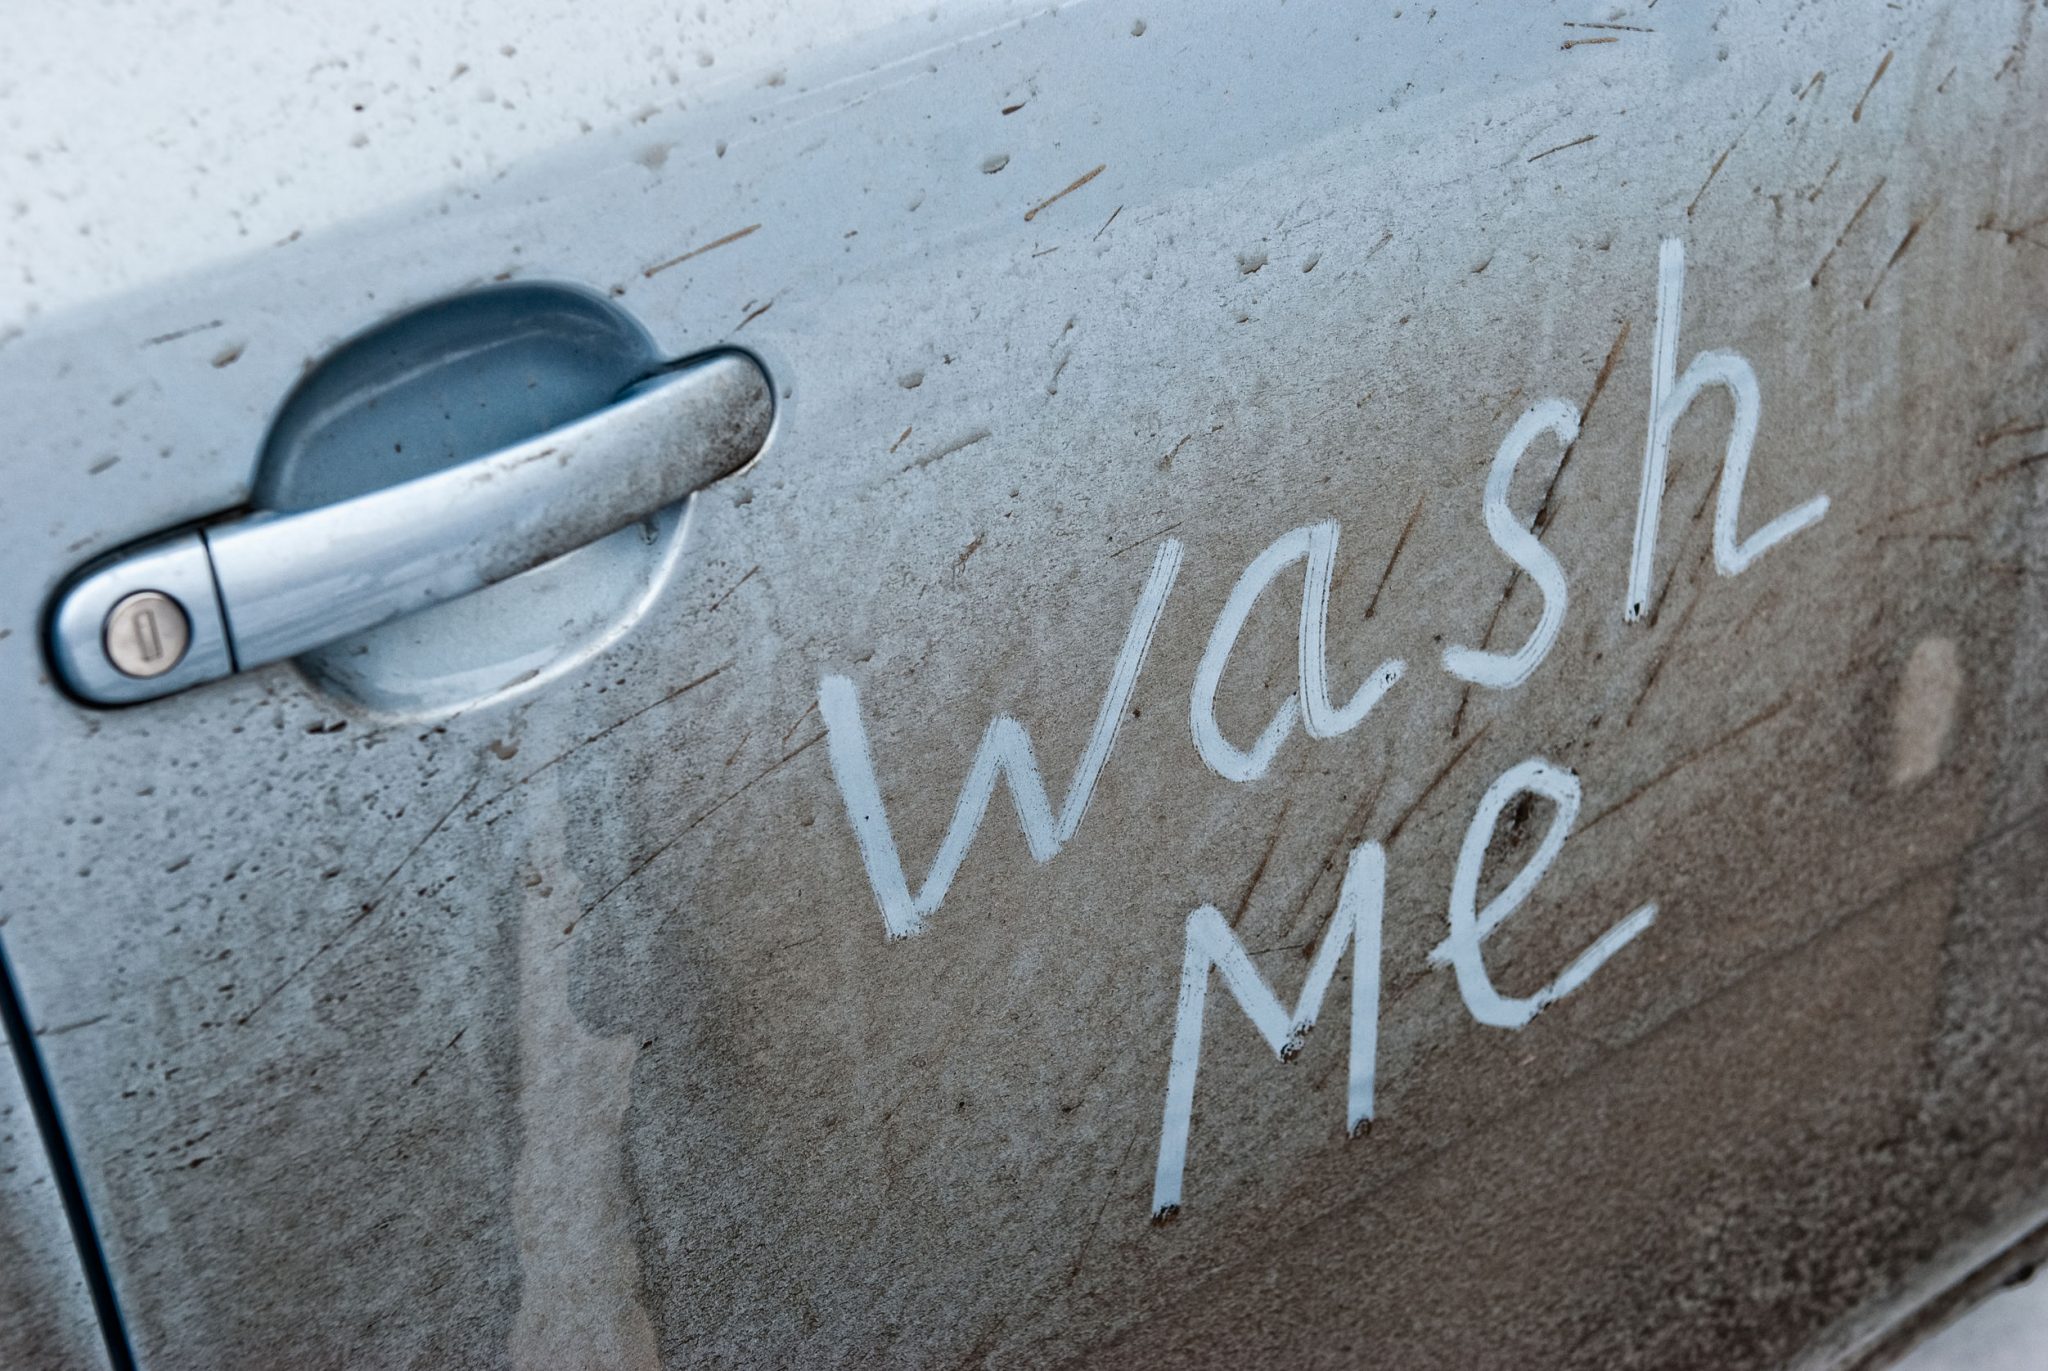 How Do You Wash Your Car At Home?